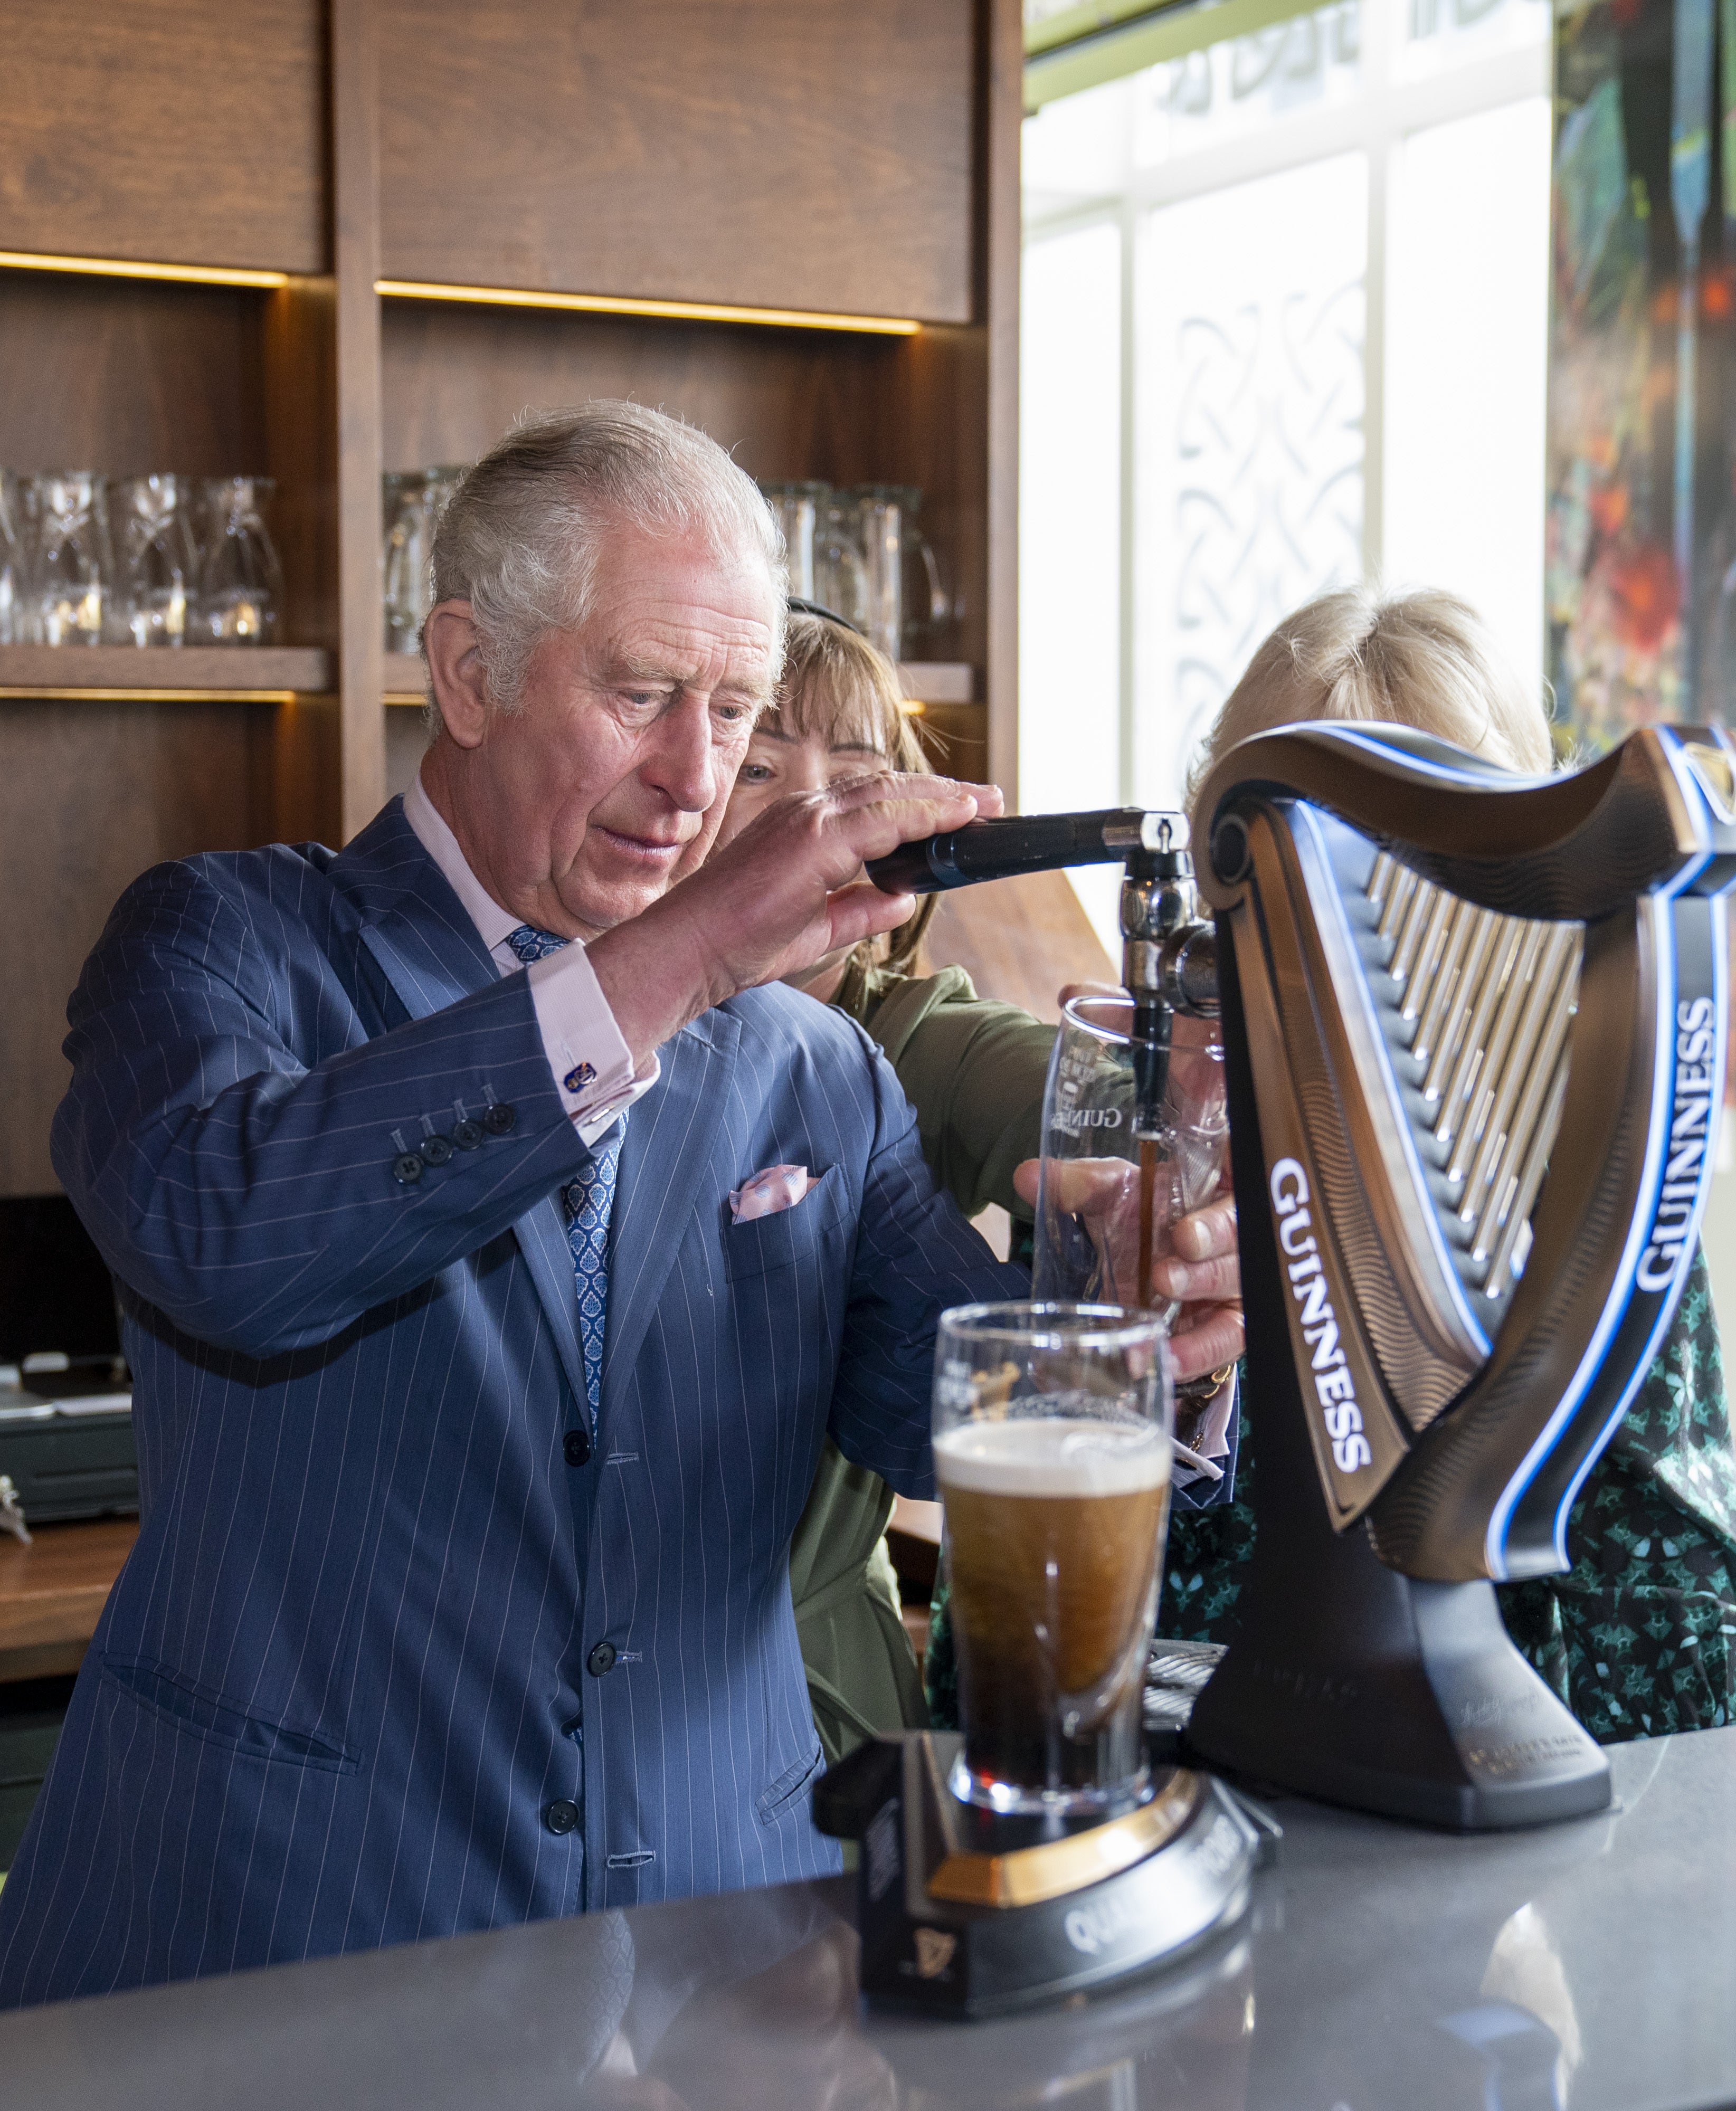 Charles pulls a pint of Guinness as he celebrates ahead of St Patricks Day The Independent pic